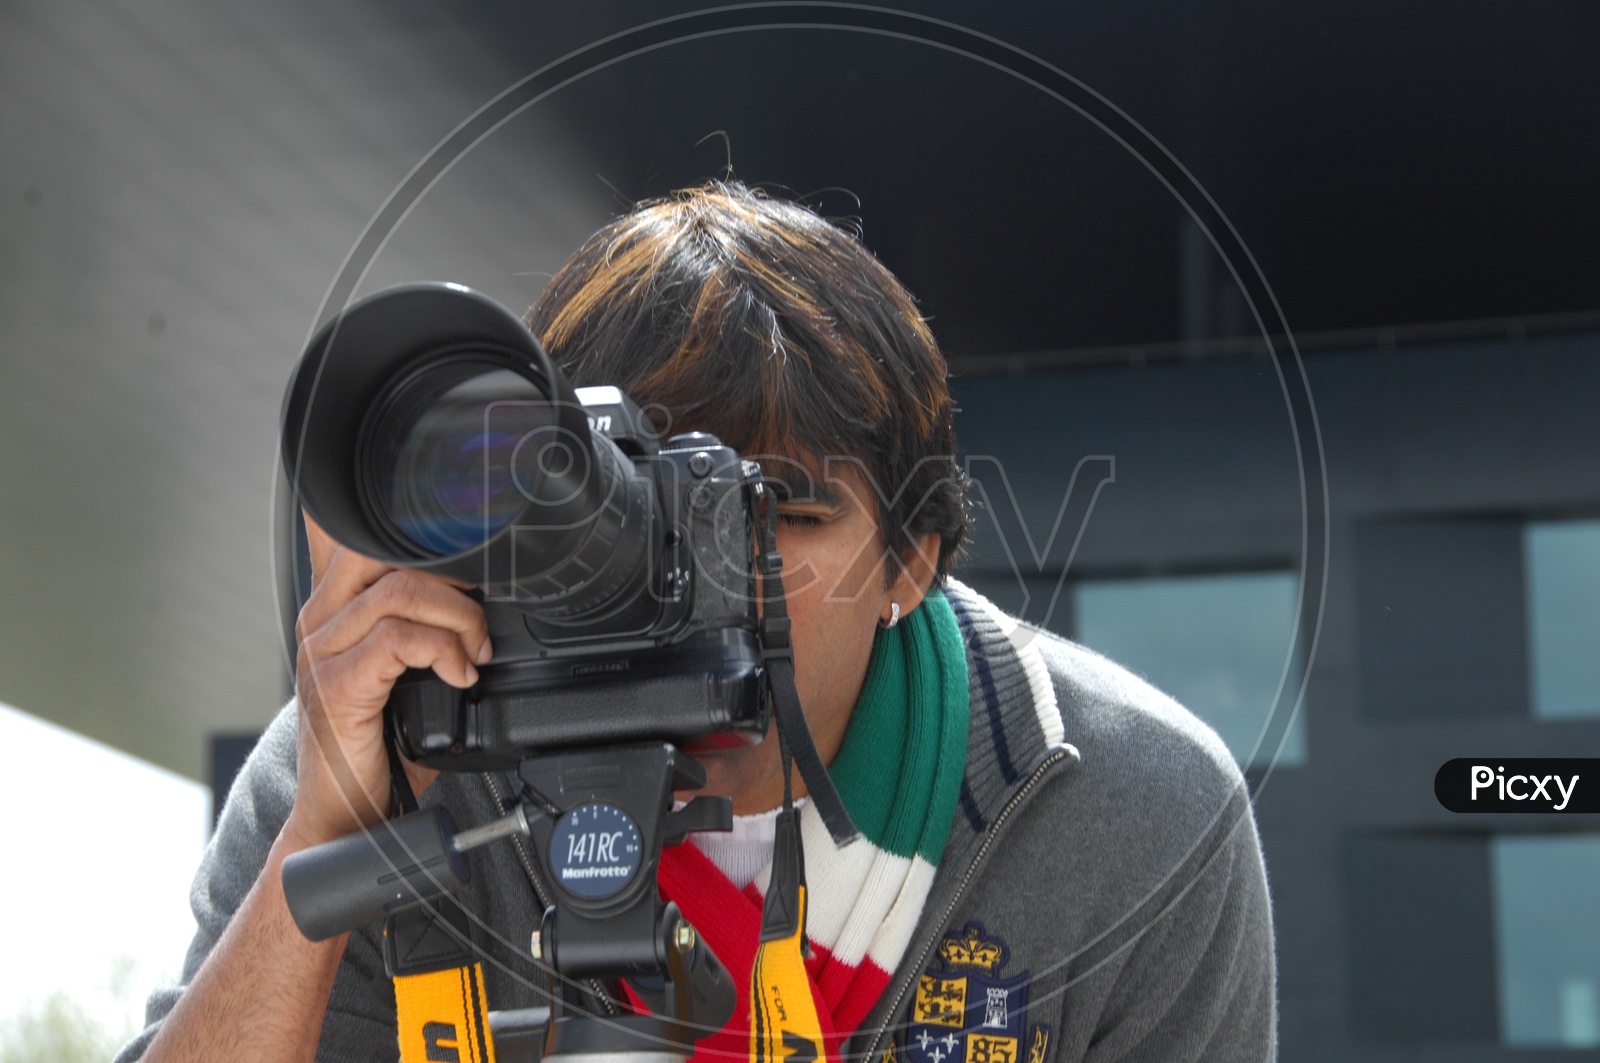 Tollywood Actor Ravi Teja With a DSLR  Camera In  Movie Working Stills